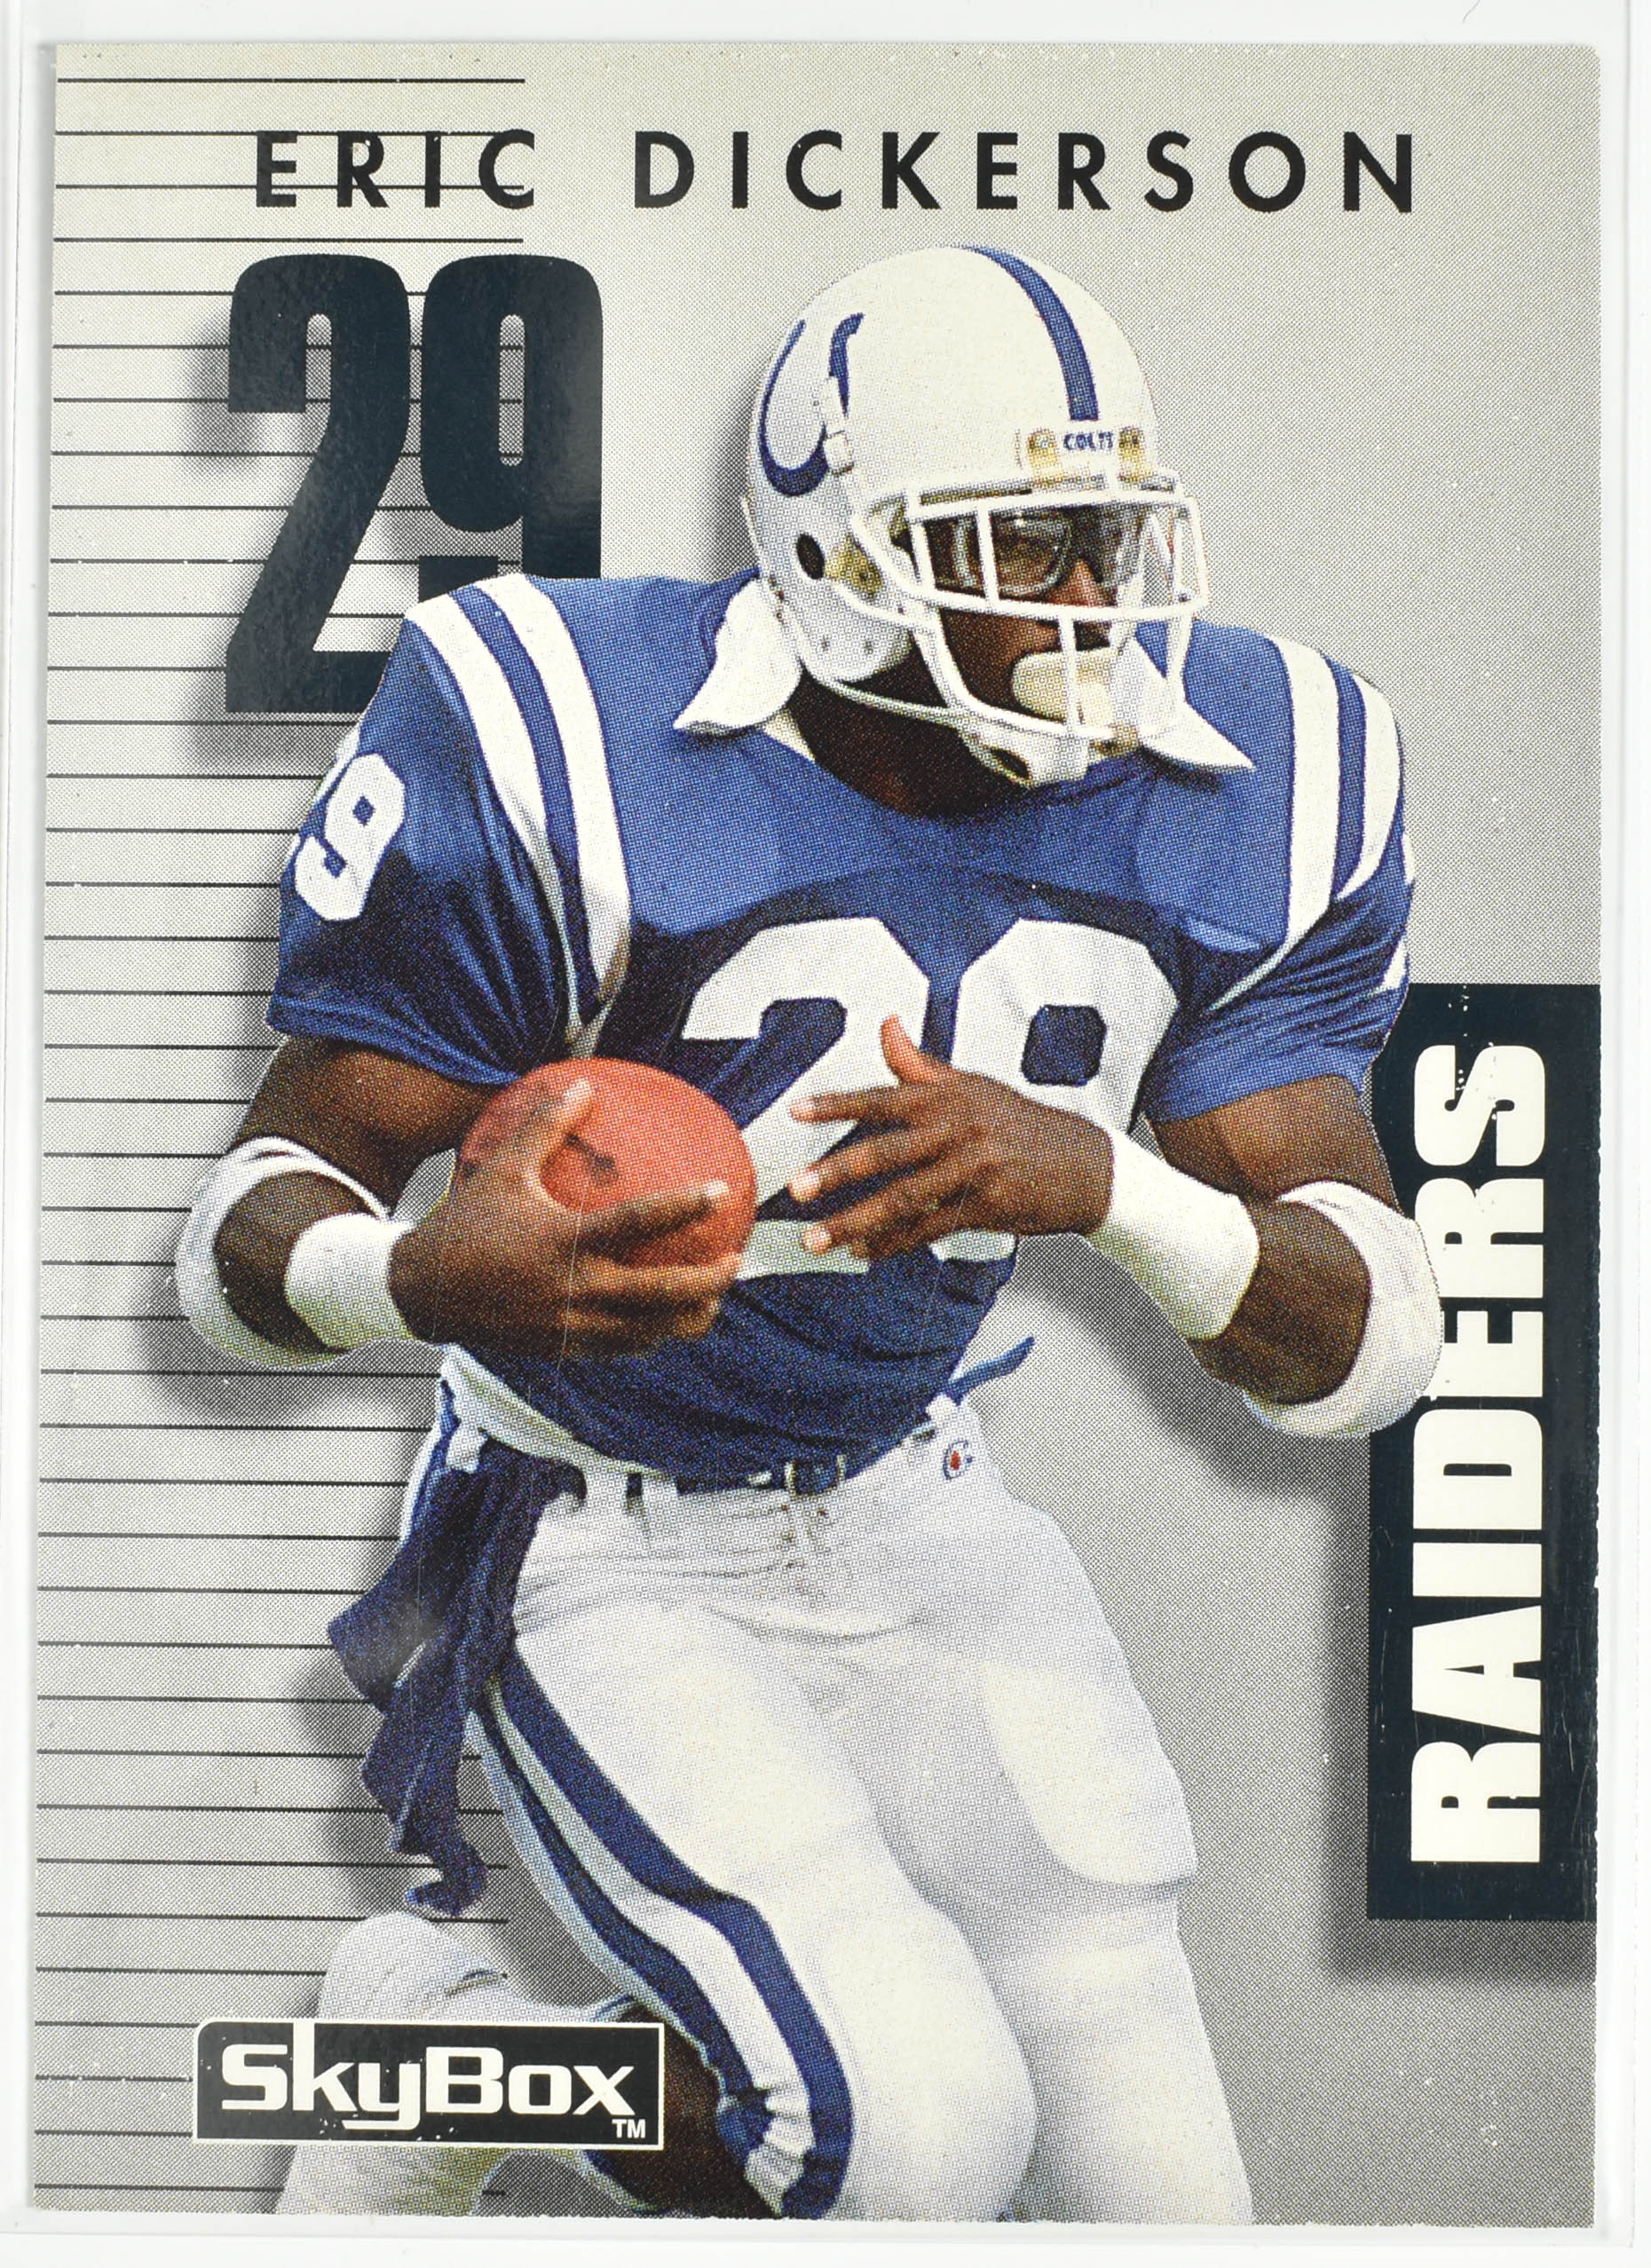 1992 Eric Dickerson 213 Skybox Colts Football Card